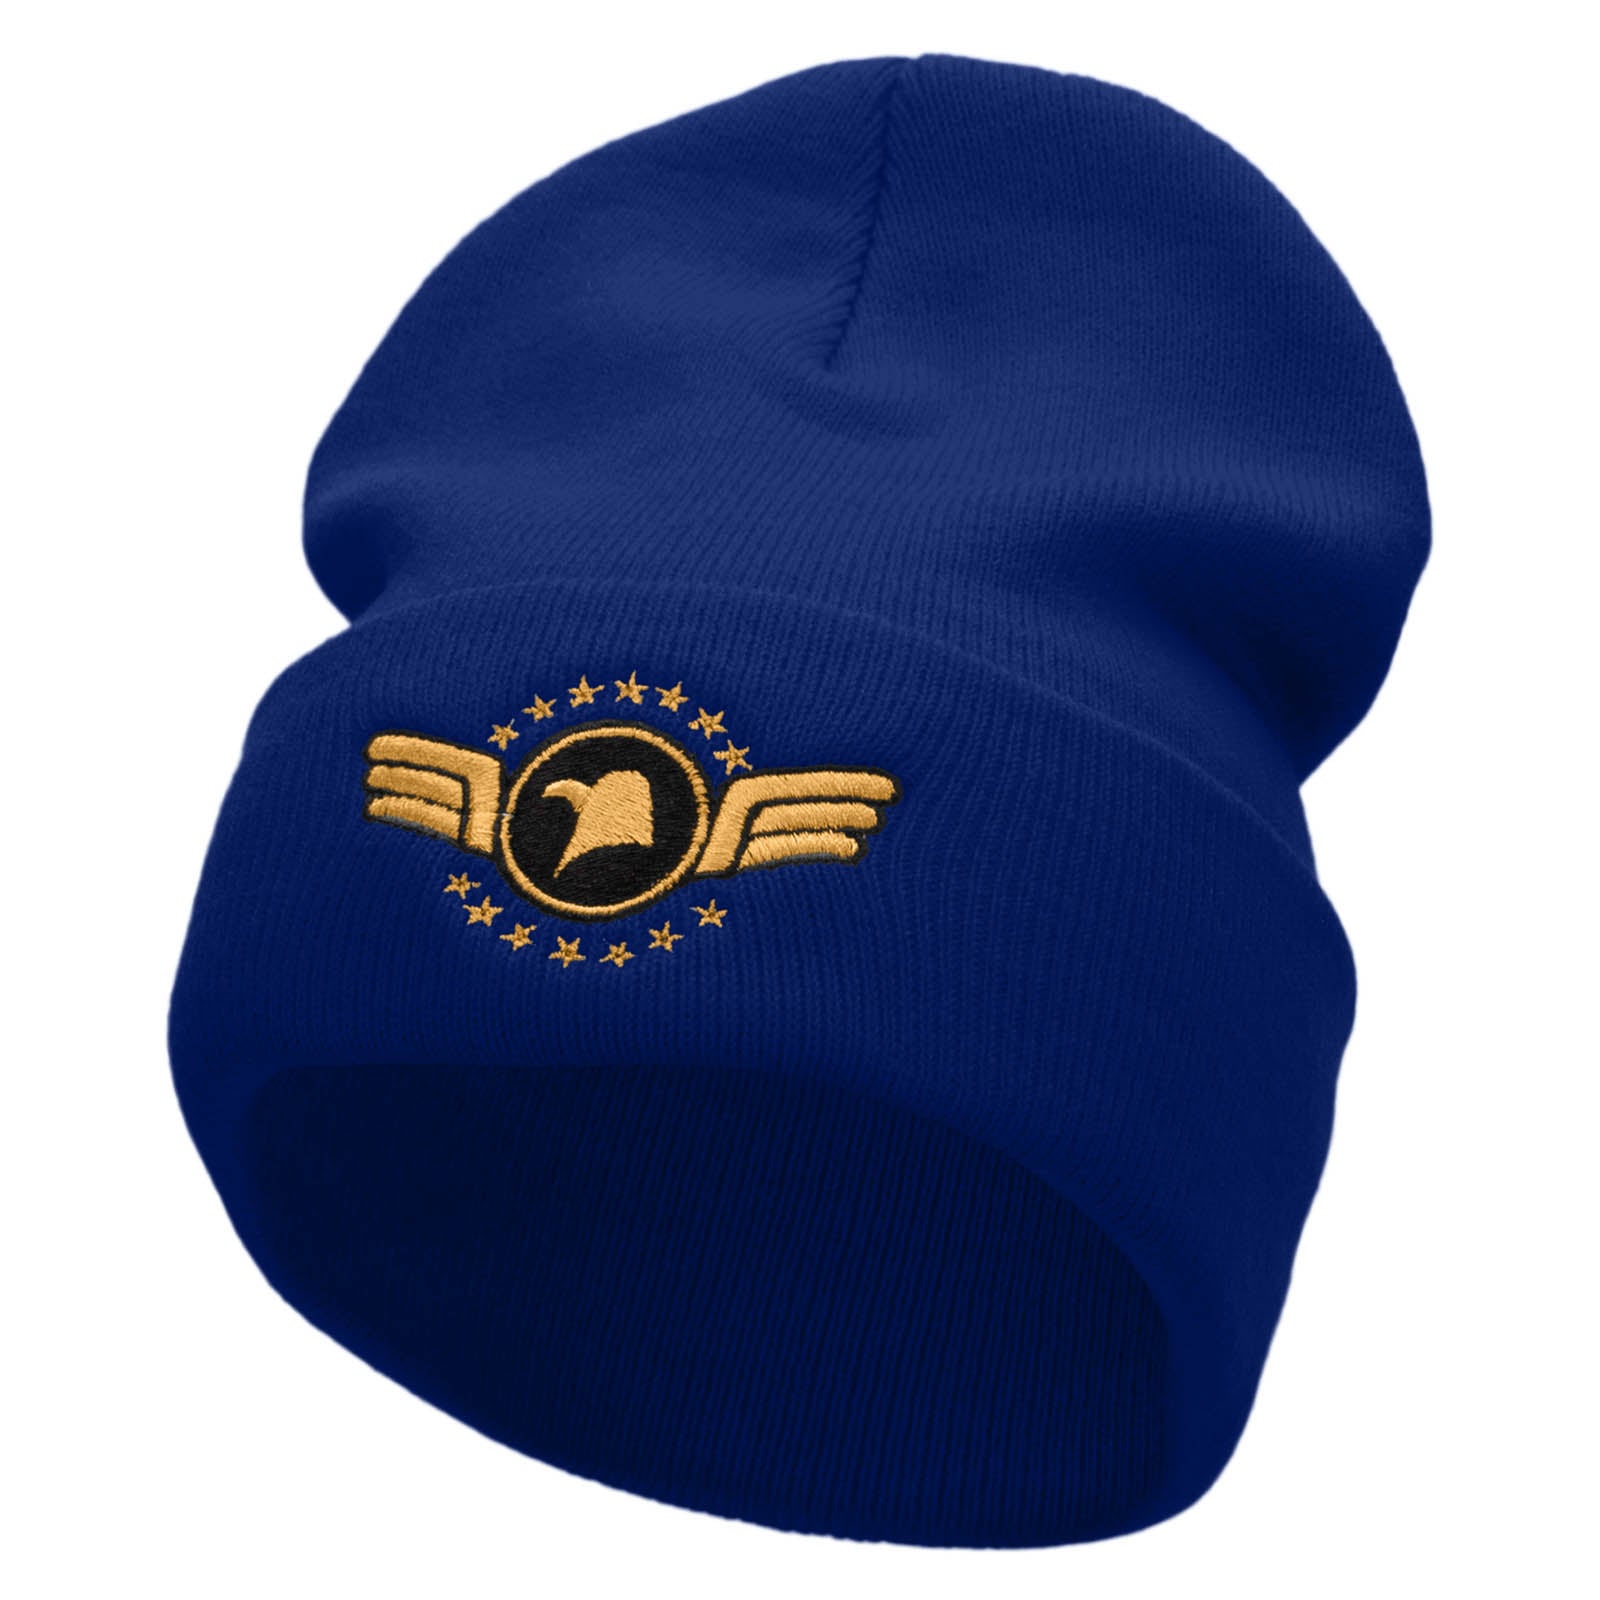 Airforce Eagle Badge Embroidered 12 Inch Long Knitted Beanie - Royal OSFM